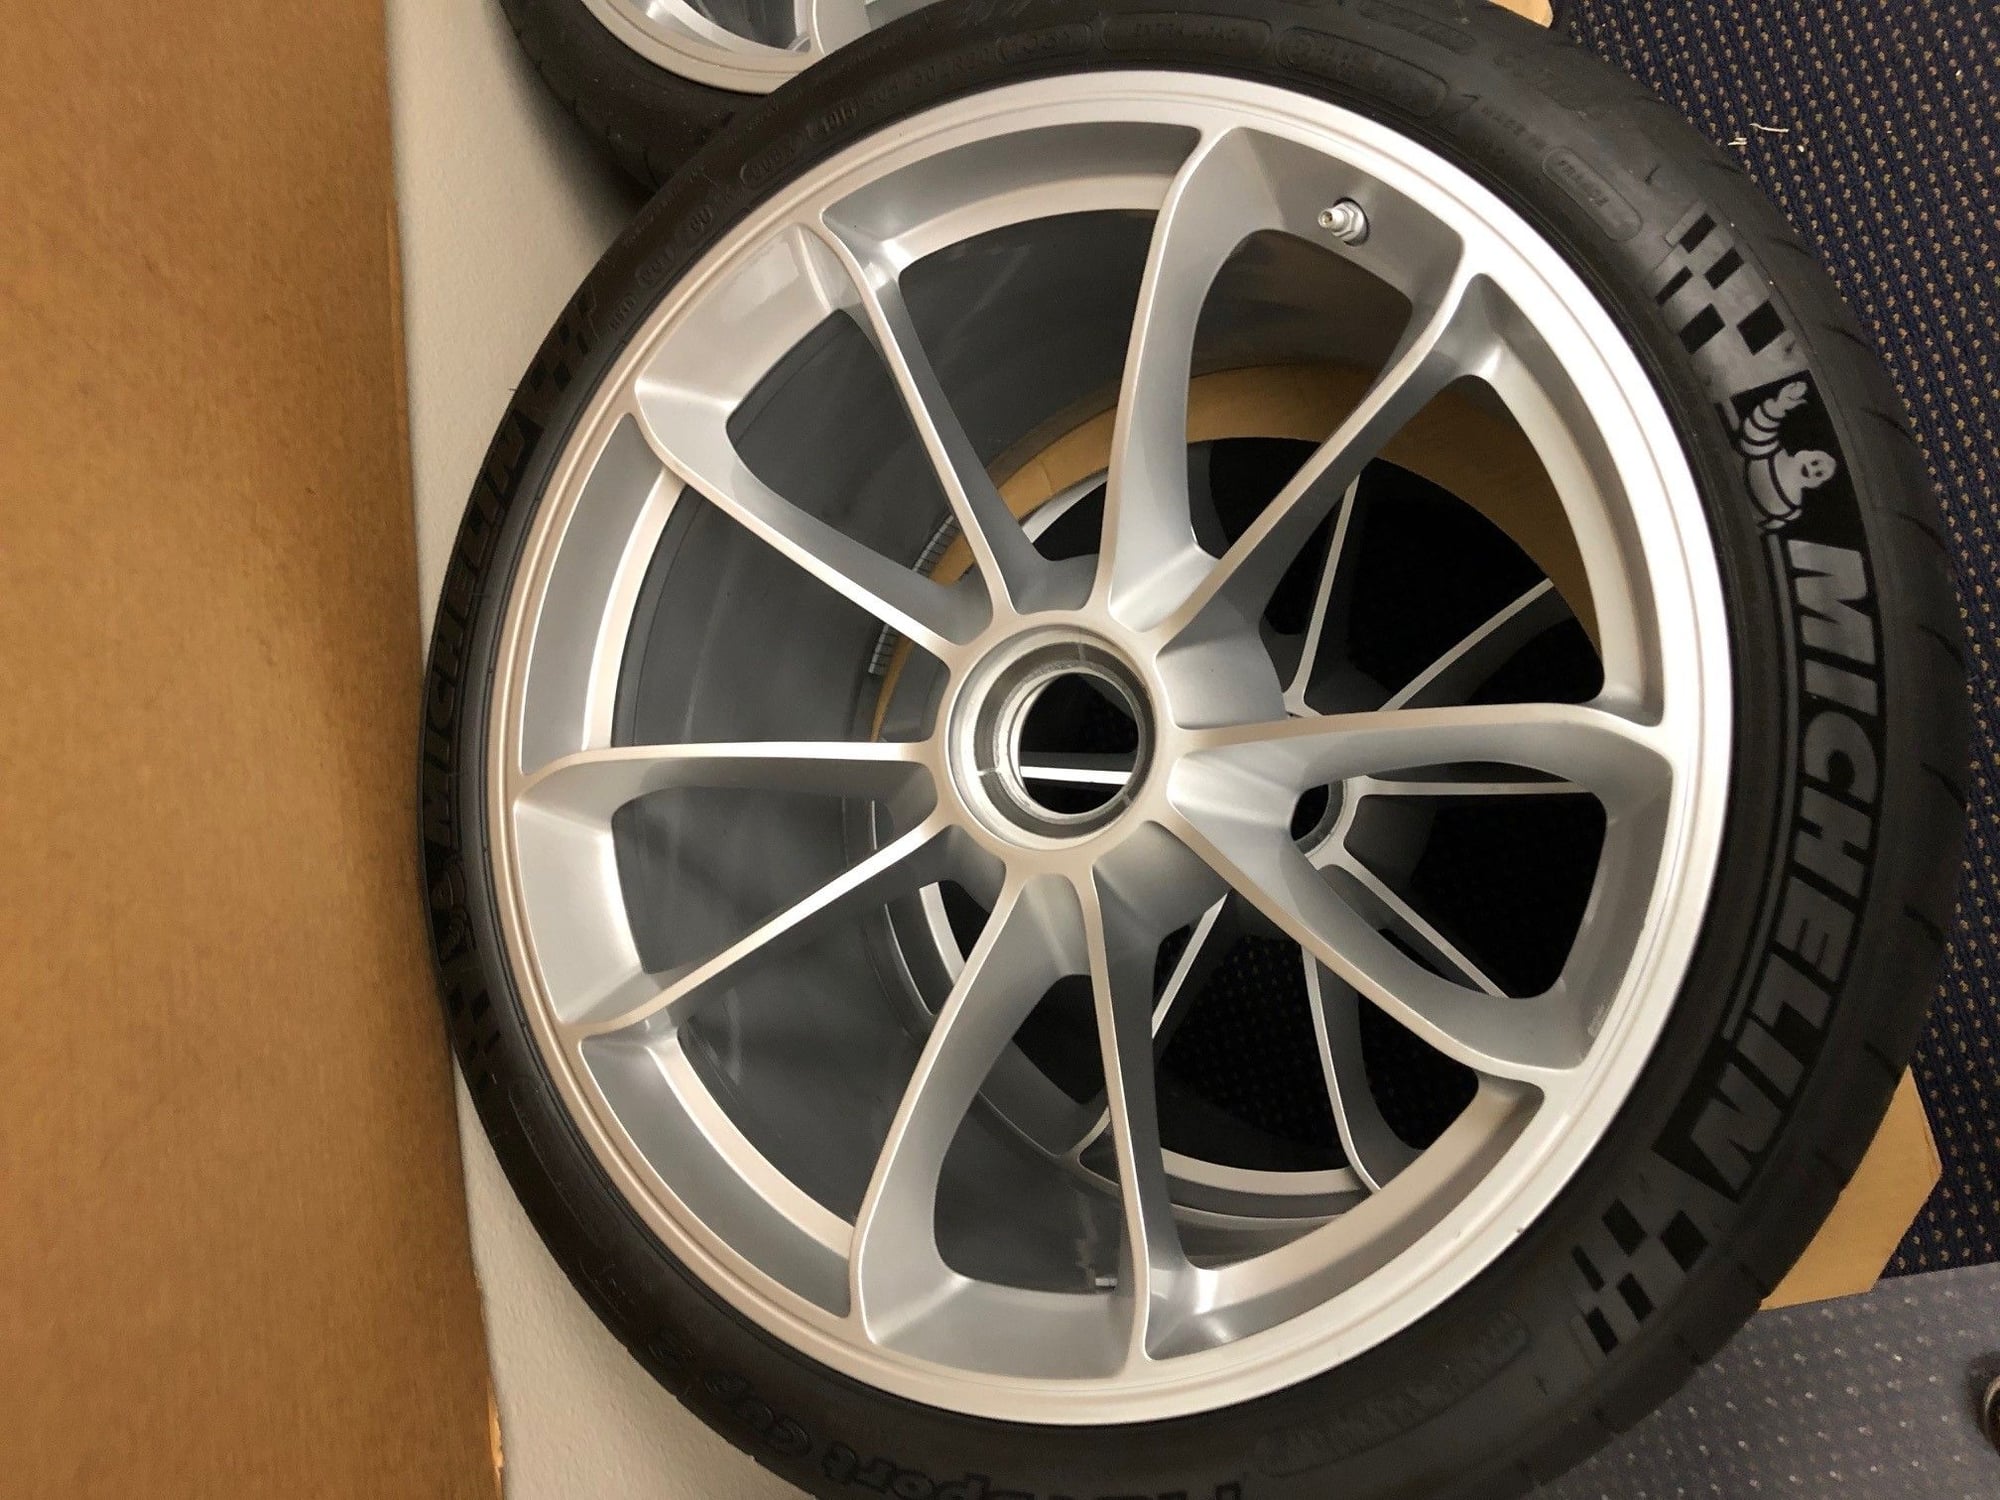 Wheels and Tires/Axles - 991 GT3 Platinum Silver wheels and tires - Used - 2014 to 2016 Porsche GT3 - Tacoma, WA 98424, United States